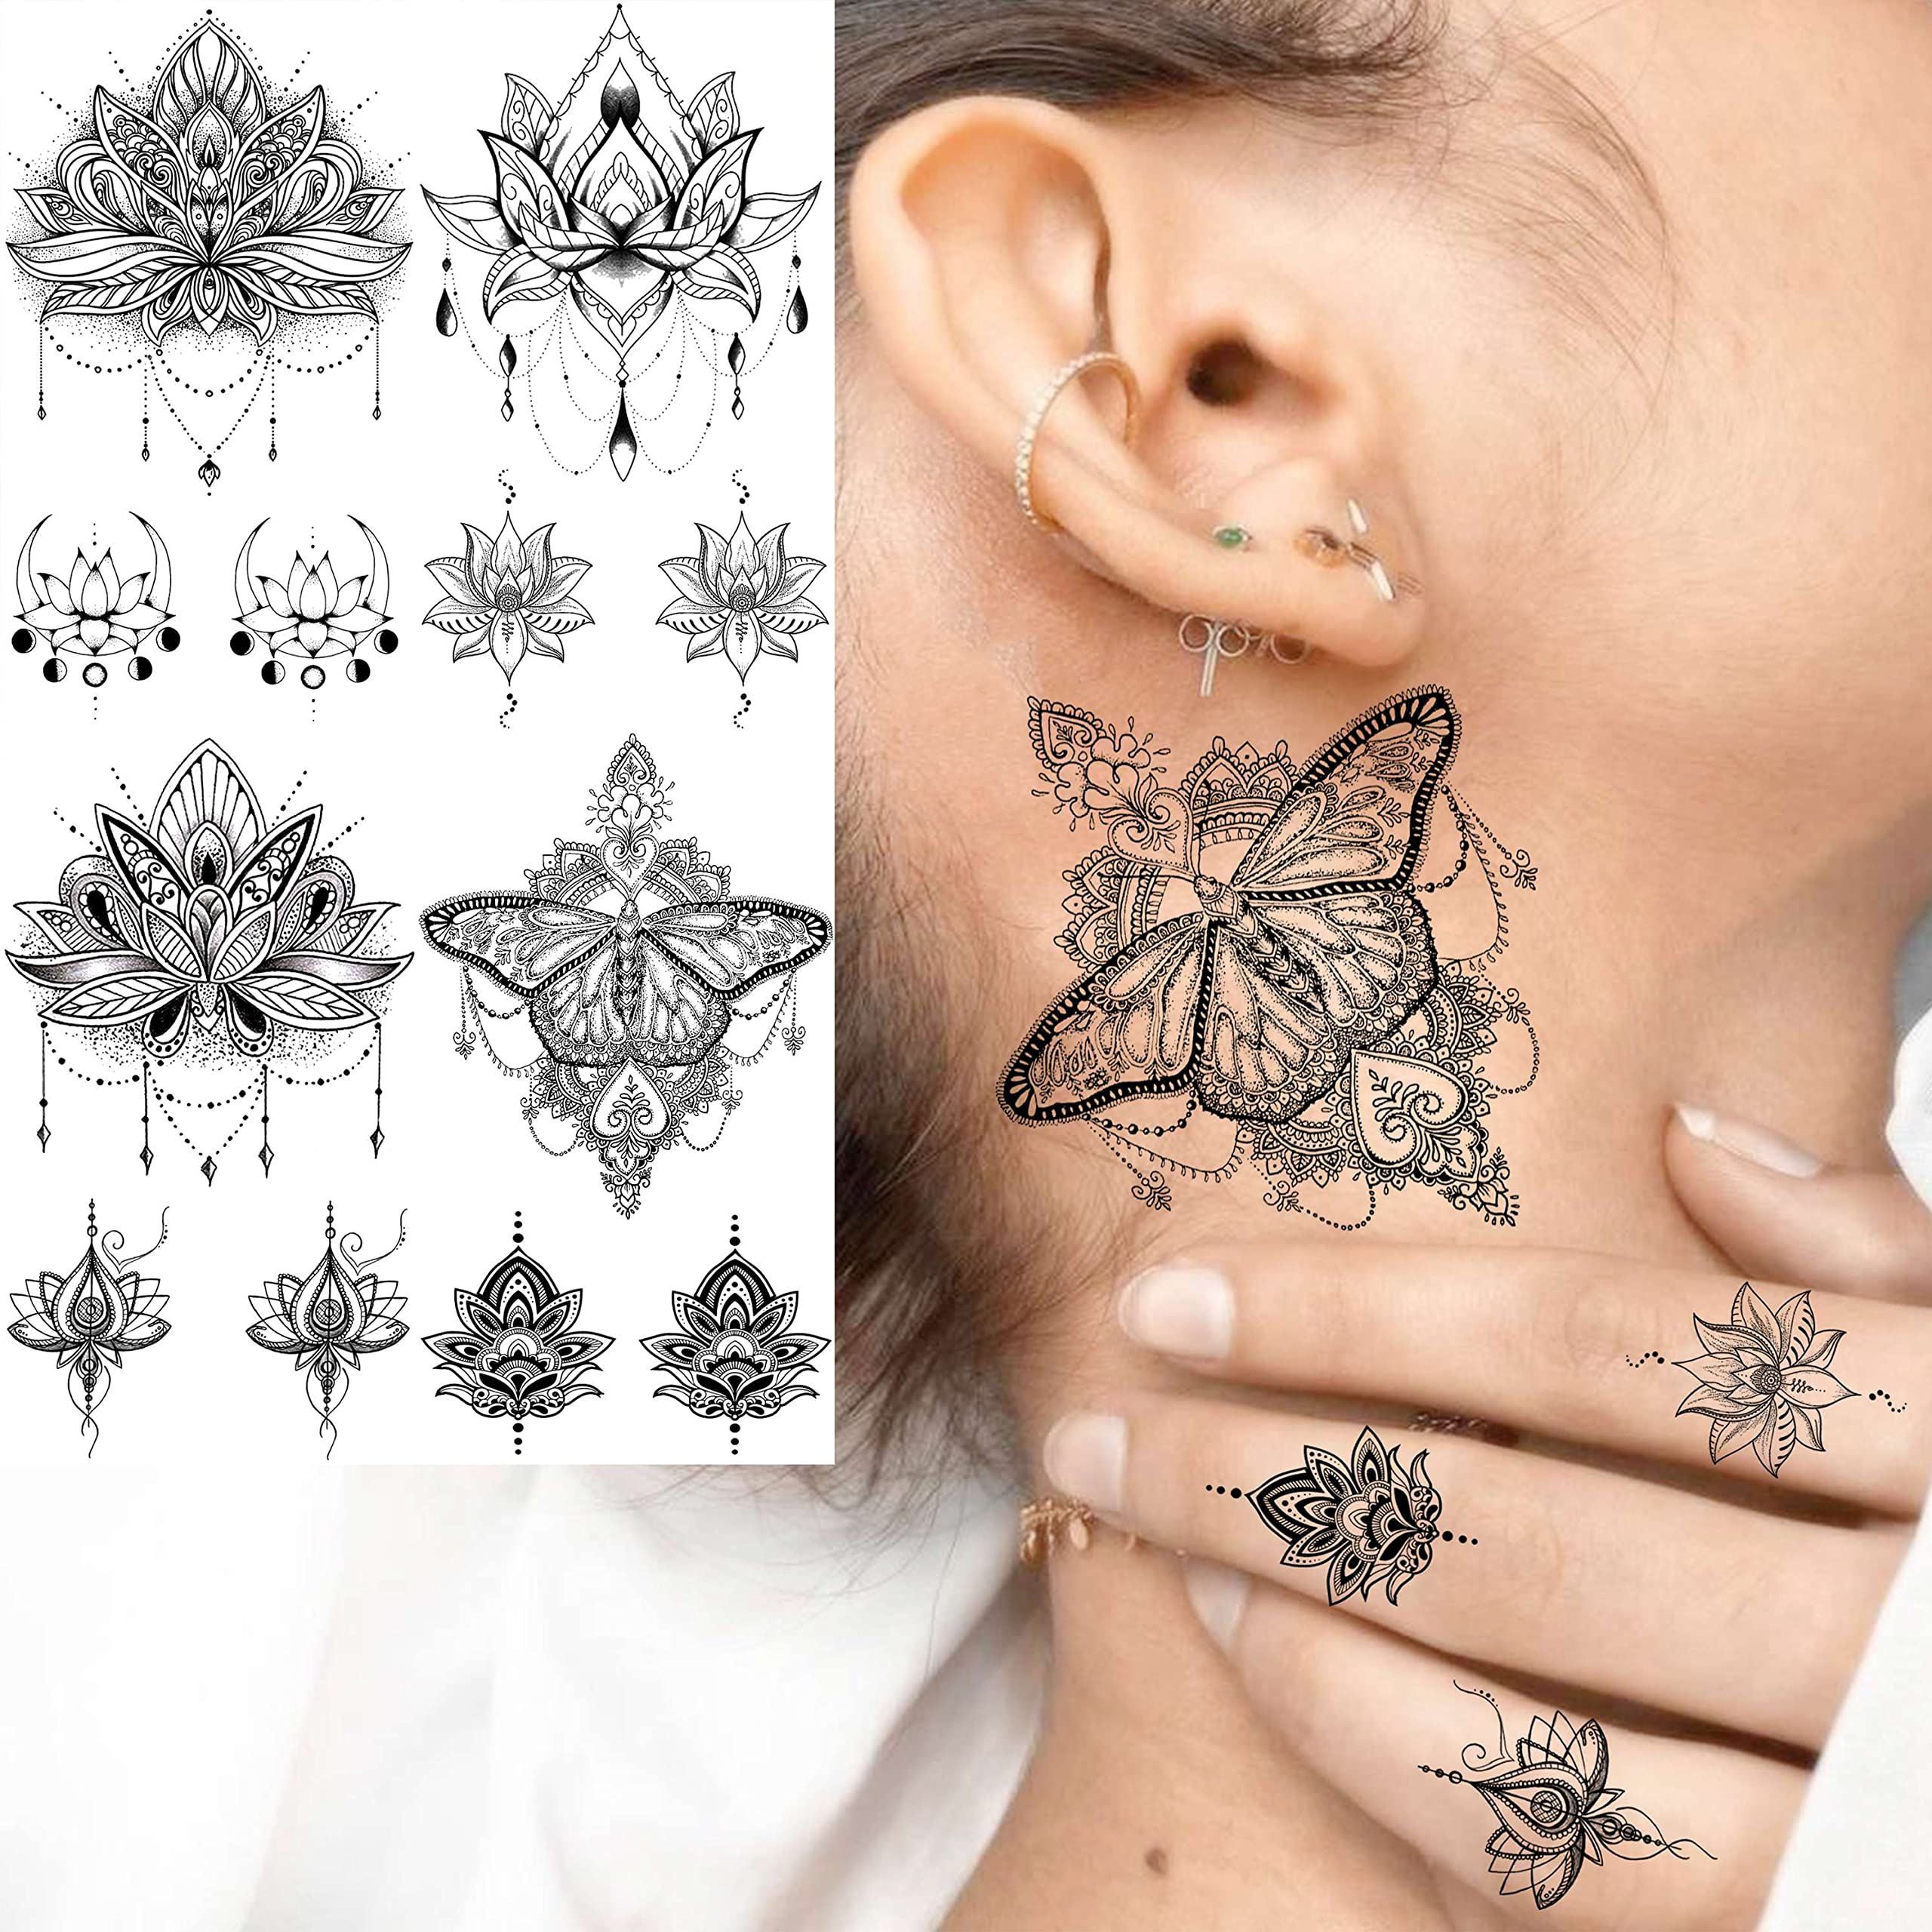 EGMBGM 15 Sheets Sexy Black Lotus Temporary Tattoos For Women Wedding Brides, Tribal Fake Jewelry Pendant Lace Moon Moth Flowers Temp Tattoos Temporary Sticker For Girls Arm Neck Hands Tatoos Jewels